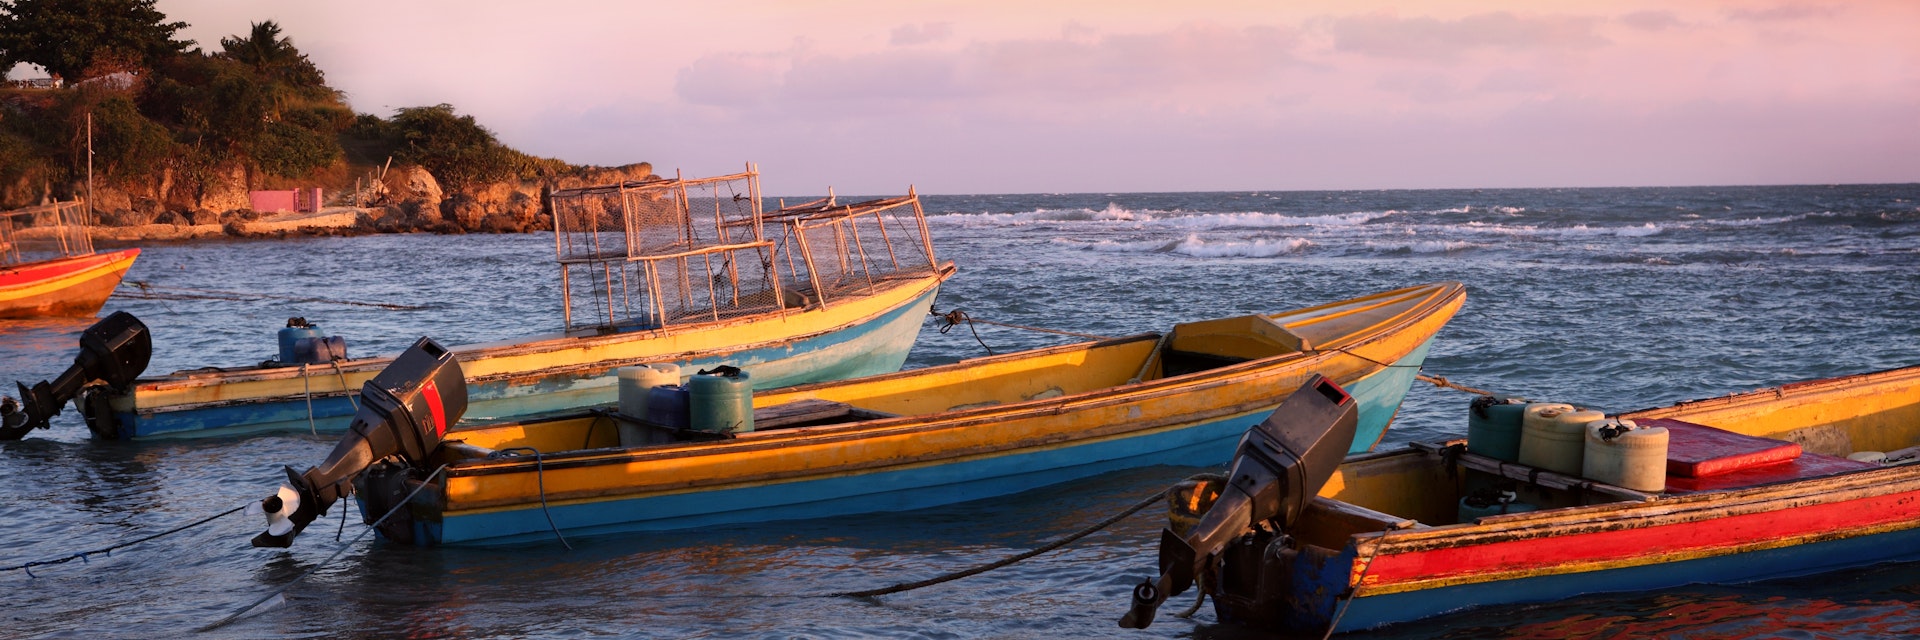 Fishing boats in sunset light